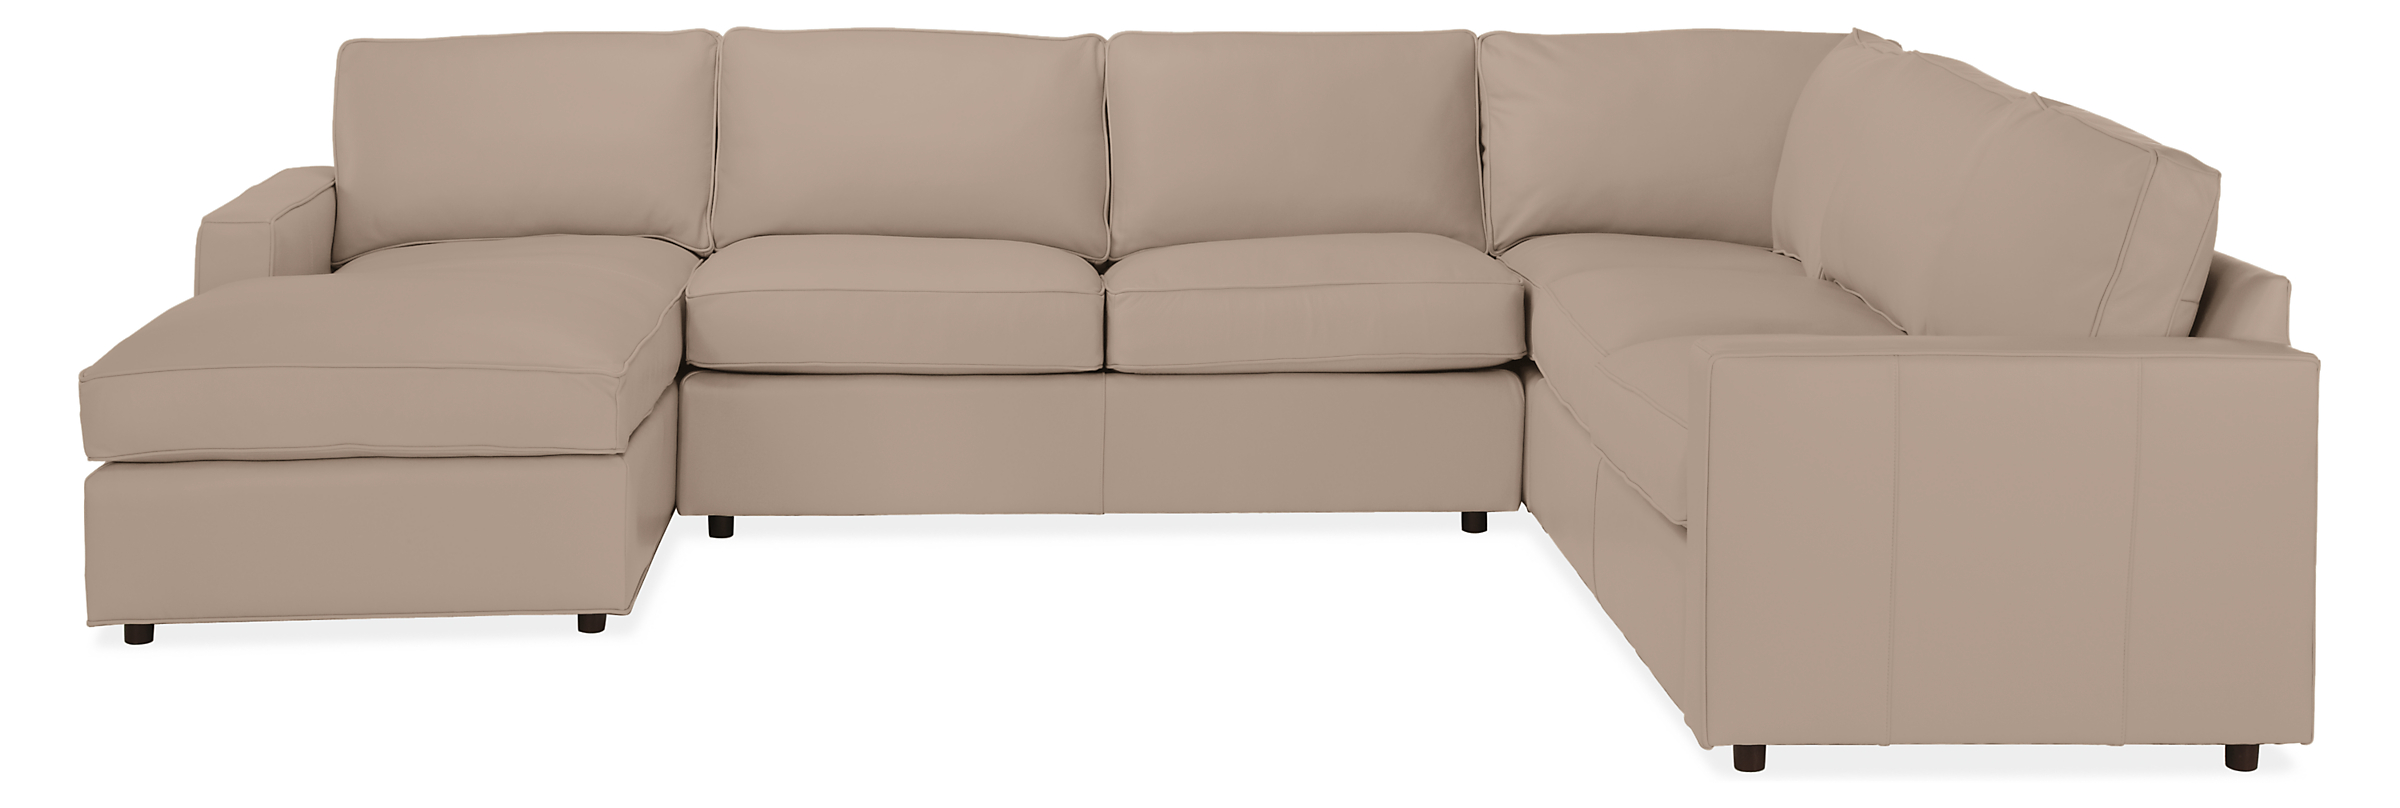 York 136x103" Four-Piece Sectional with Left-Arm Chaise